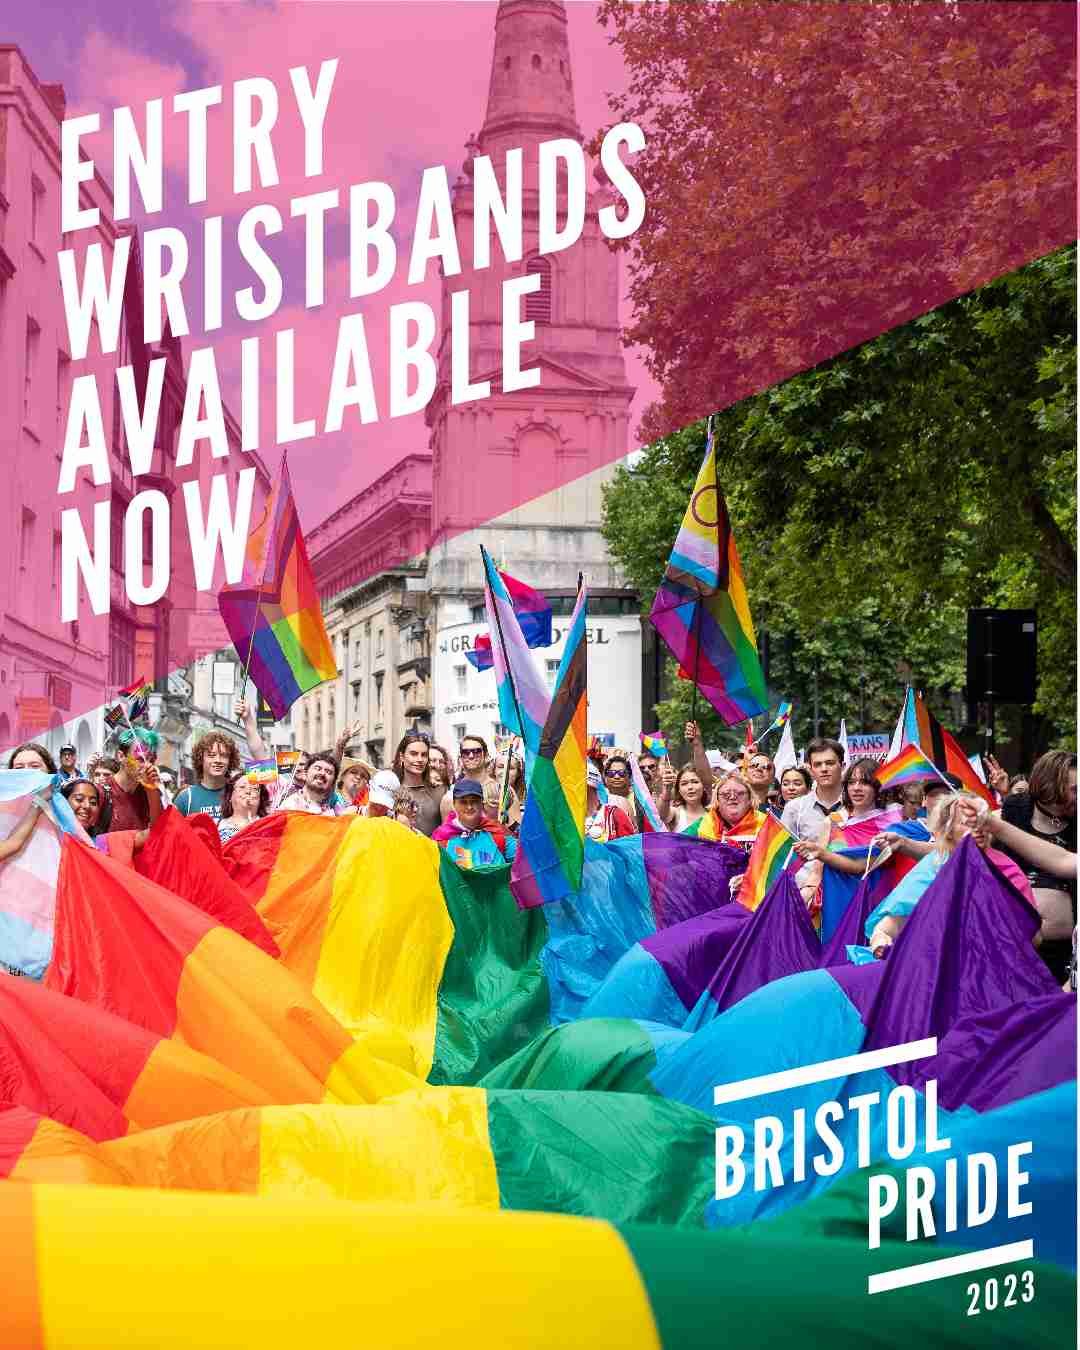 Bristol Pride parade with the words 'Entry Wristbands Available Now'